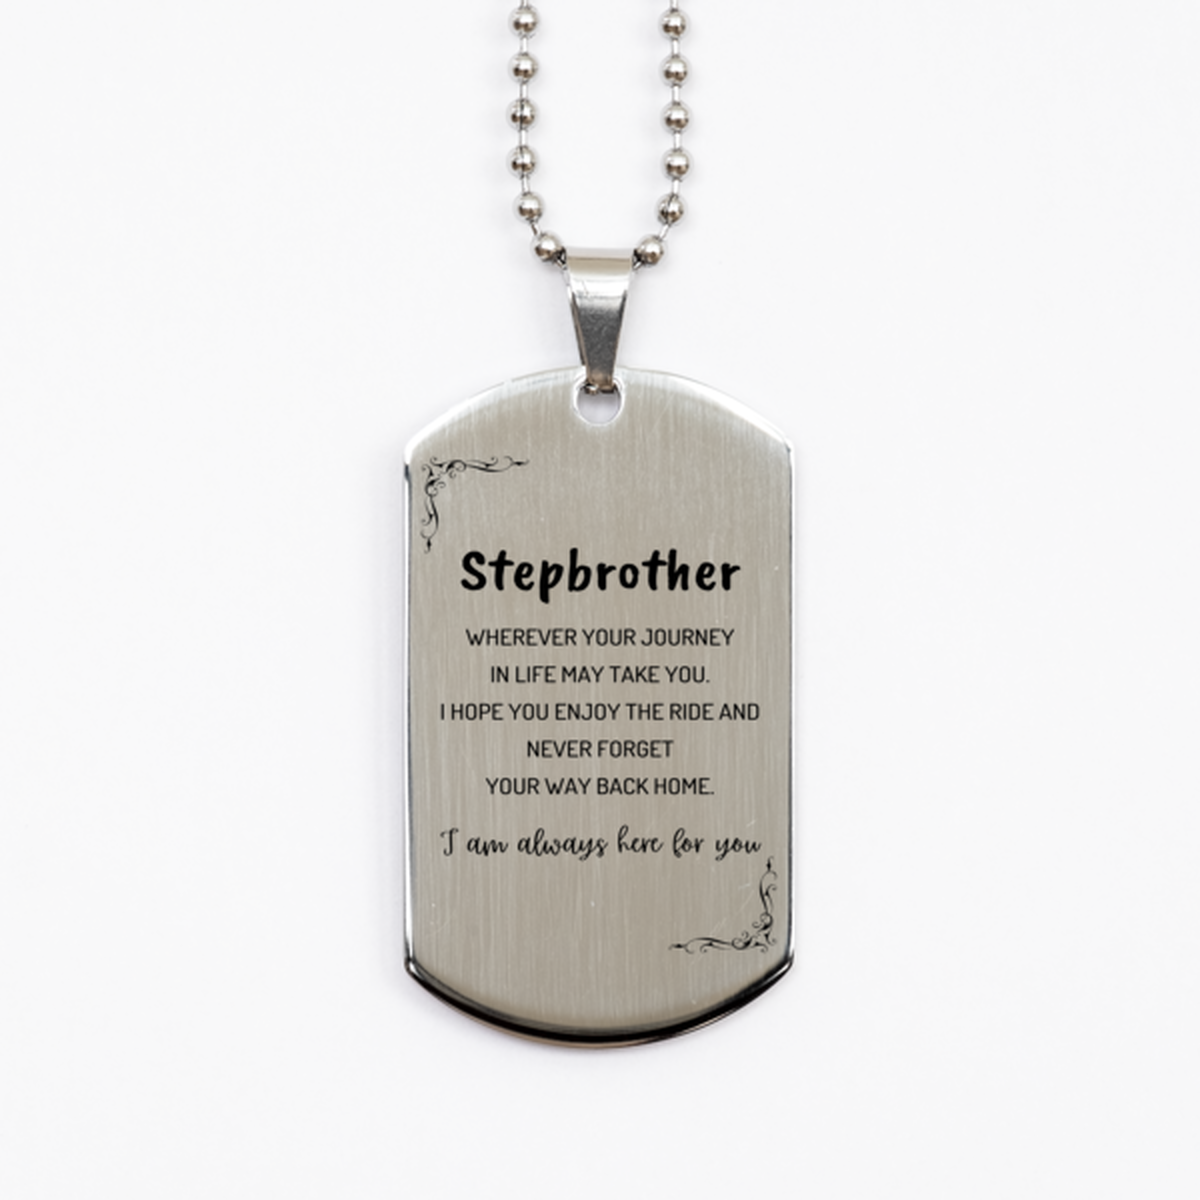 Stepbrother wherever your journey in life may take you, I am always here for you Stepbrother Silver Dog Tag, Awesome Christmas Gifts For Stepbrother, Stepbrother Birthday Gifts for Men Women Family Loved One